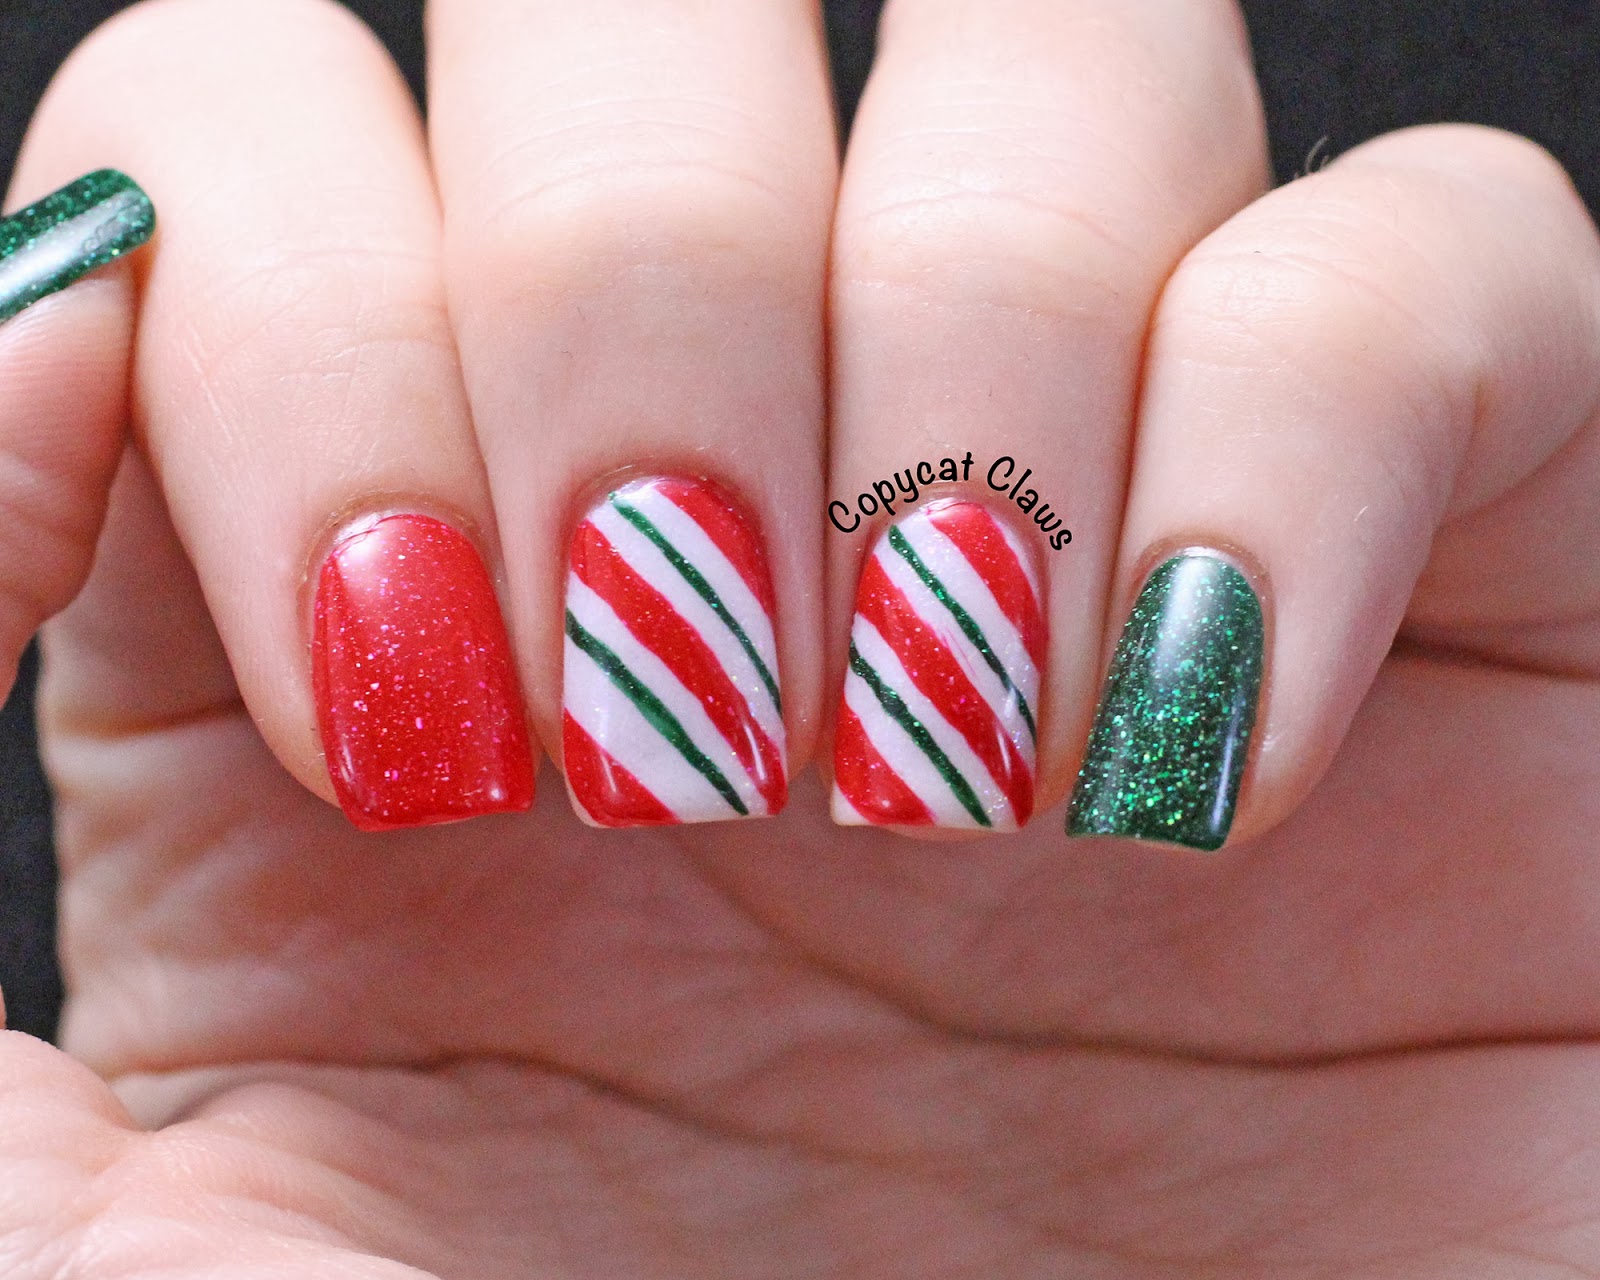 6. Sparkly Candy Cane Nail Art - wide 1